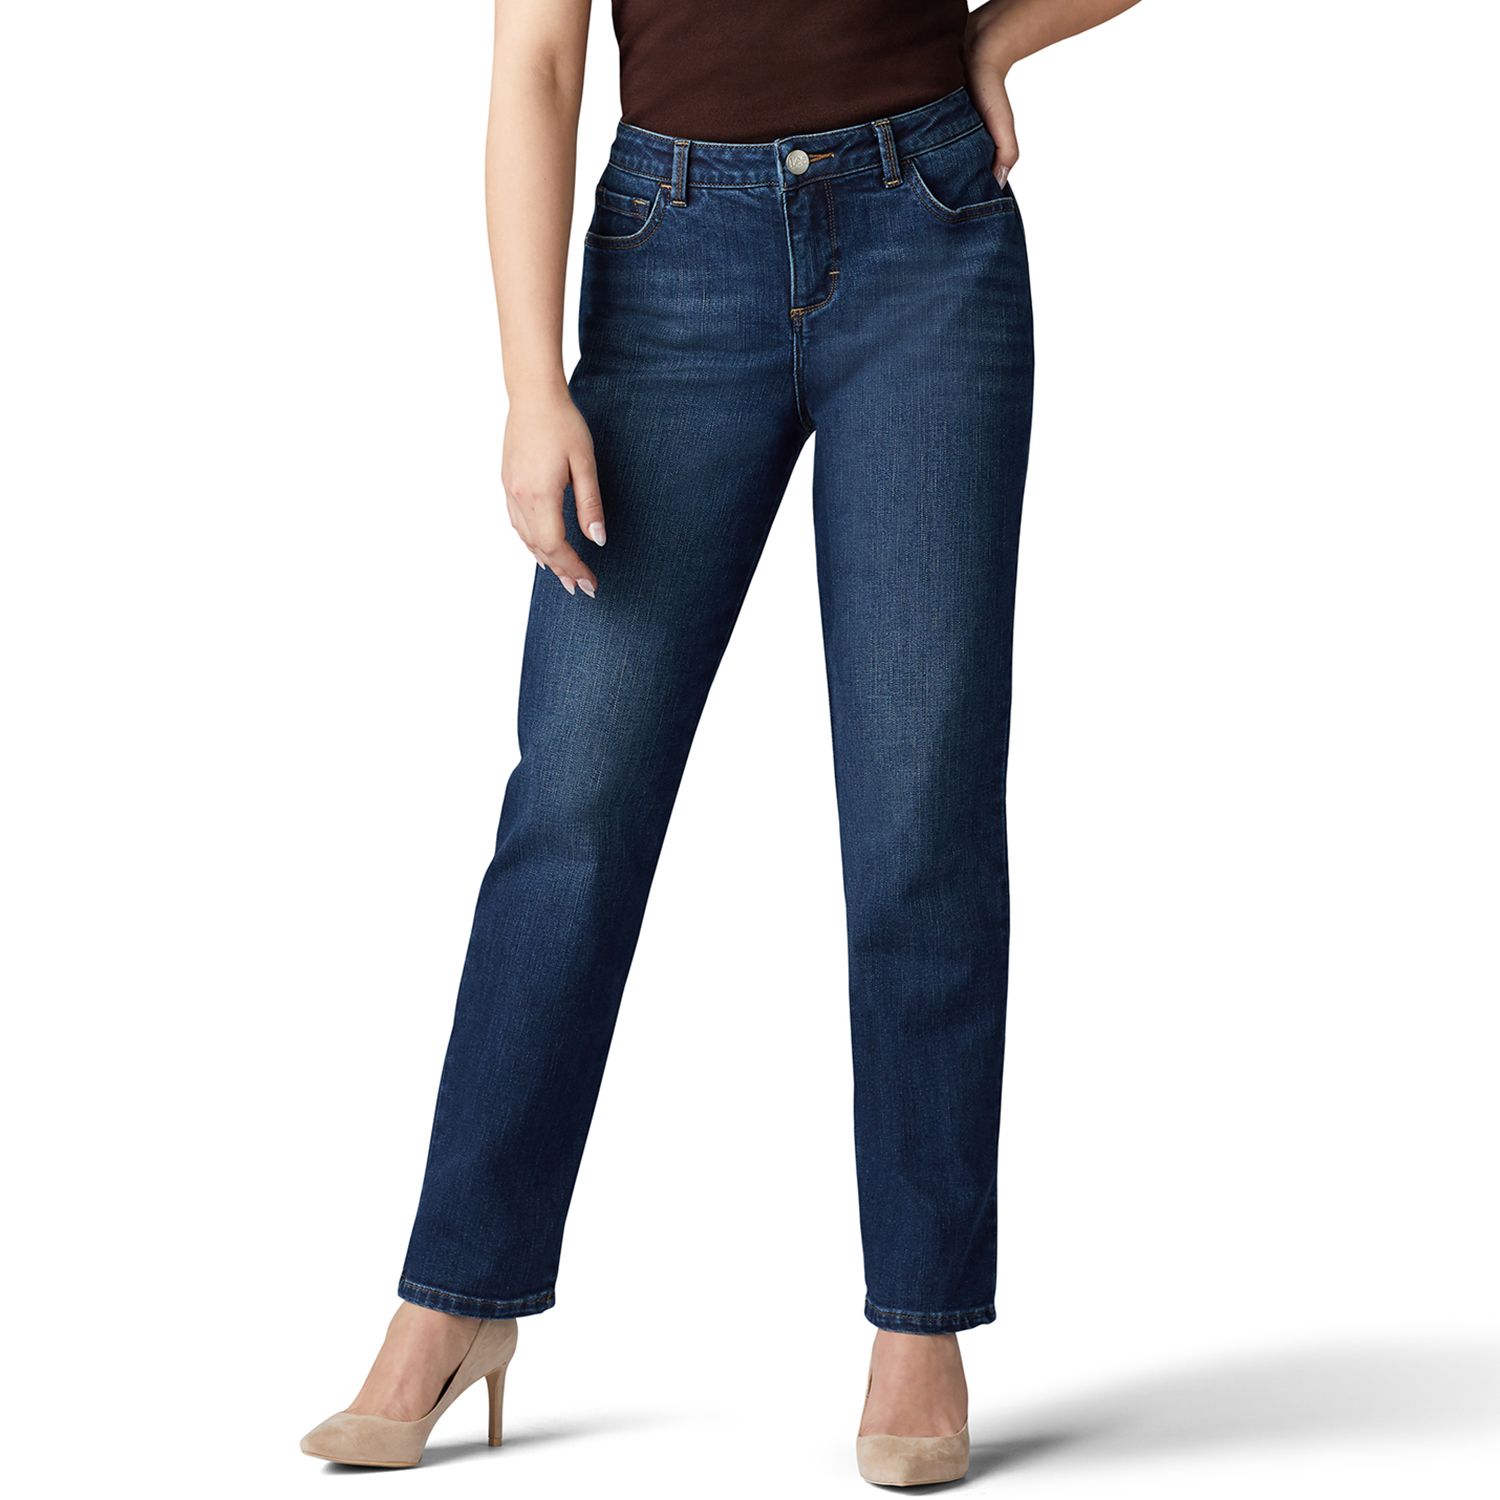 lee total freedom jeans petite